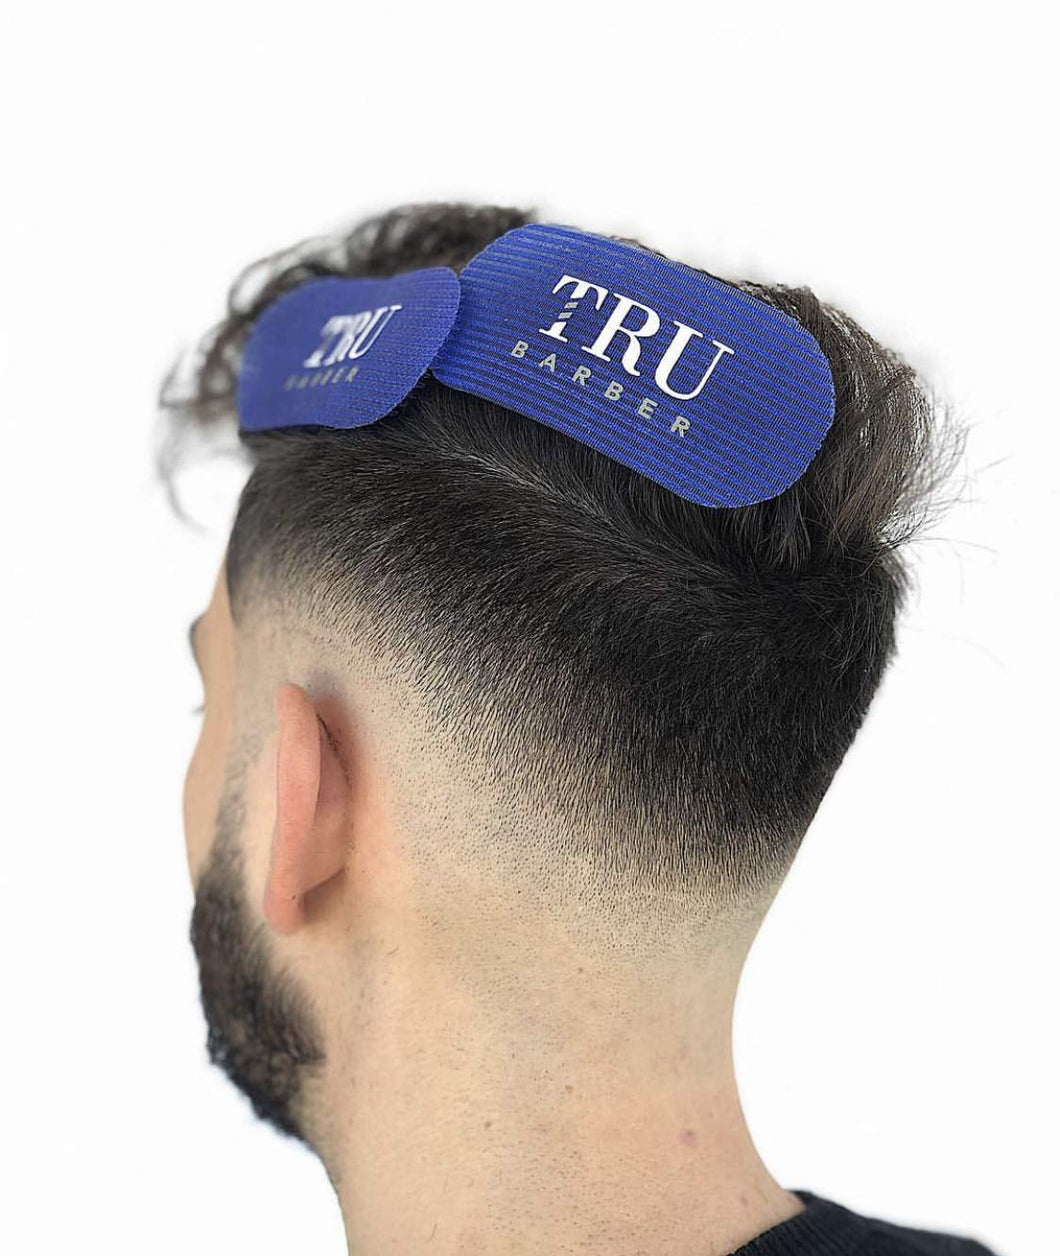 TRU BARBER HAIR GRIPPERS 3 COLORS BUNDLE PACK 6 PCS for Men and Women - Salon and Barber, Hair Clips for Styling, Hair holder Grips (Red/White/Blue)